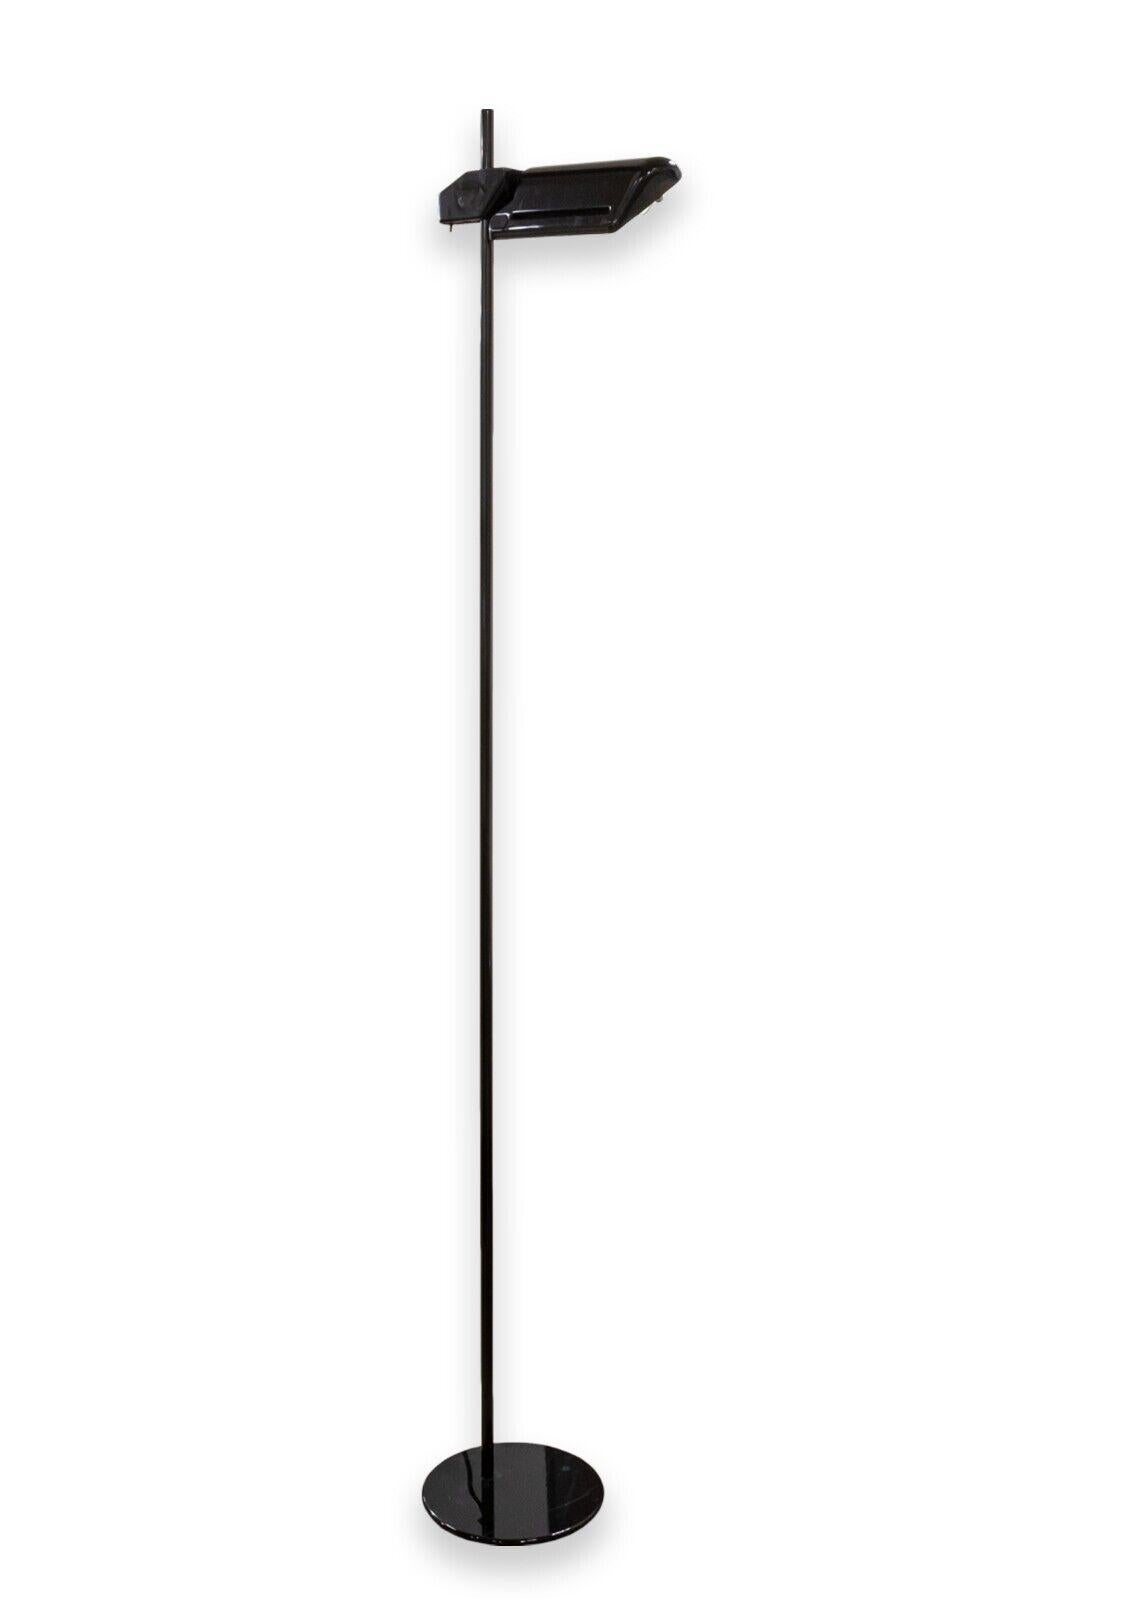 A pair of Arteluce BIS A700 floor lamps. An modern Italian set of floor lamps. These tall floor lamps feature a glossy black finish, a weighted circular base, and an adjustable head attached to the tall center pole. The switch for both of these